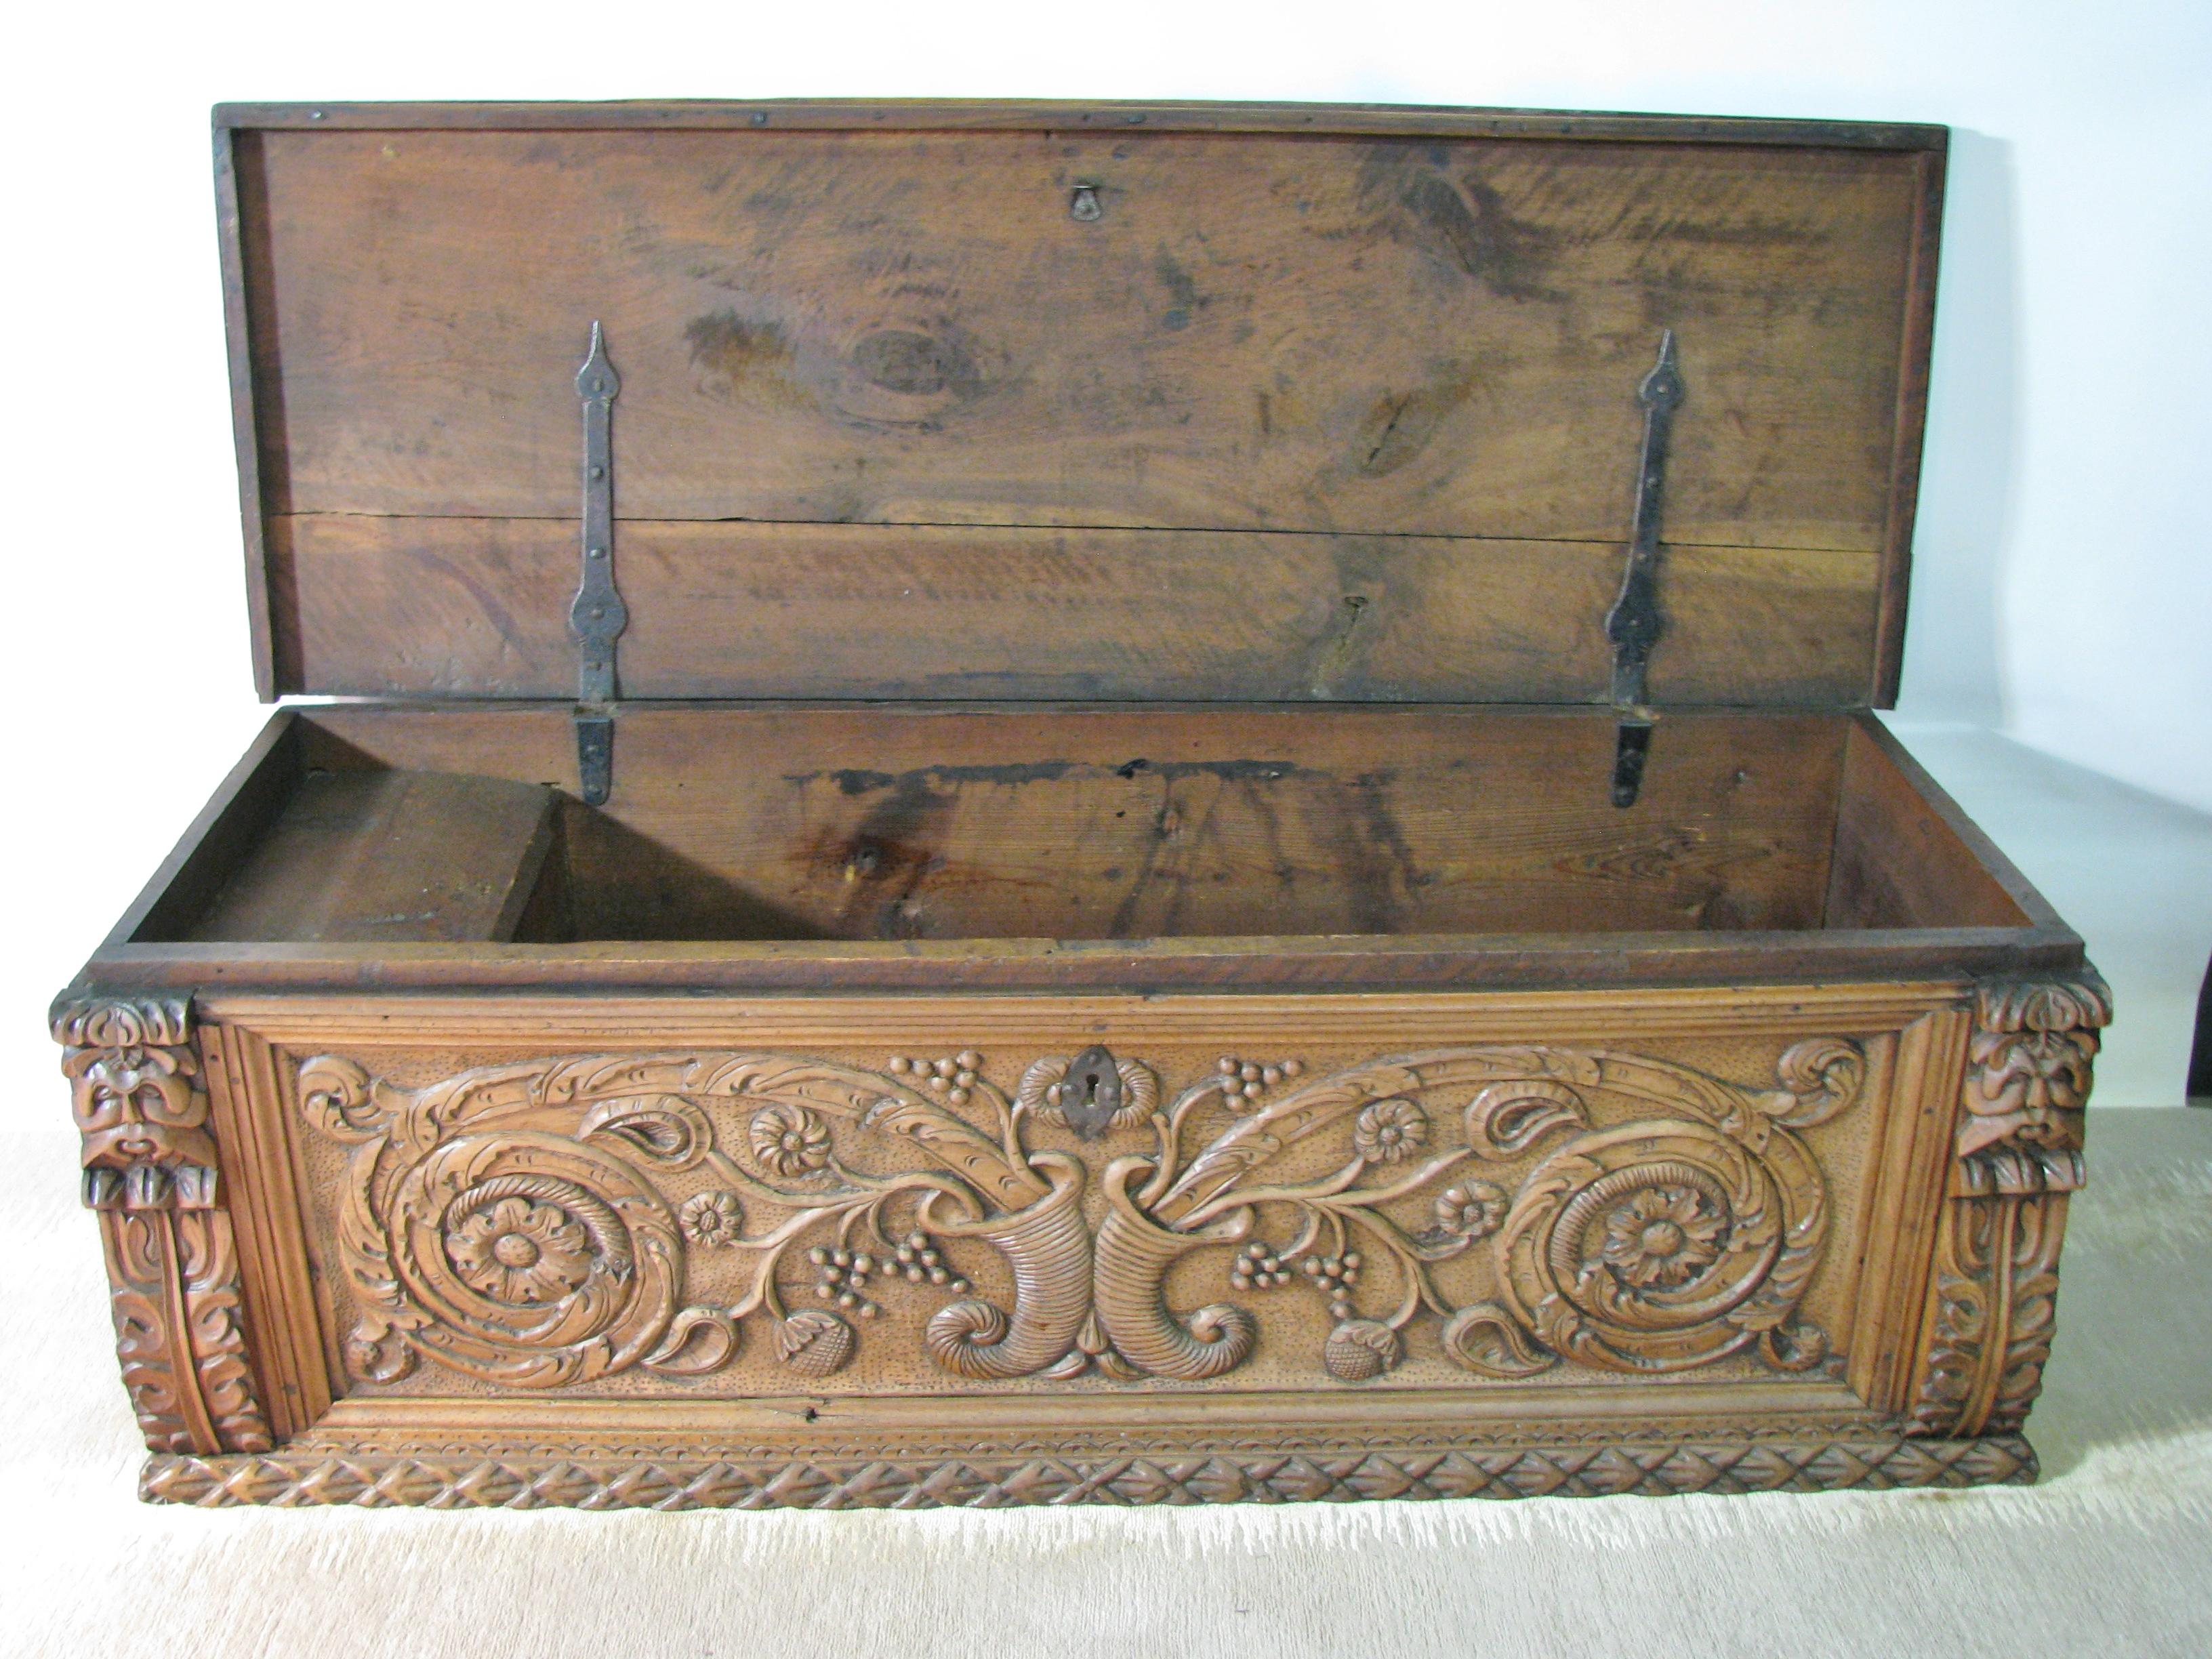 Elaborately Carved 17th Century Italian Trunk or Cassone In Good Condition For Sale In Geneva, IL